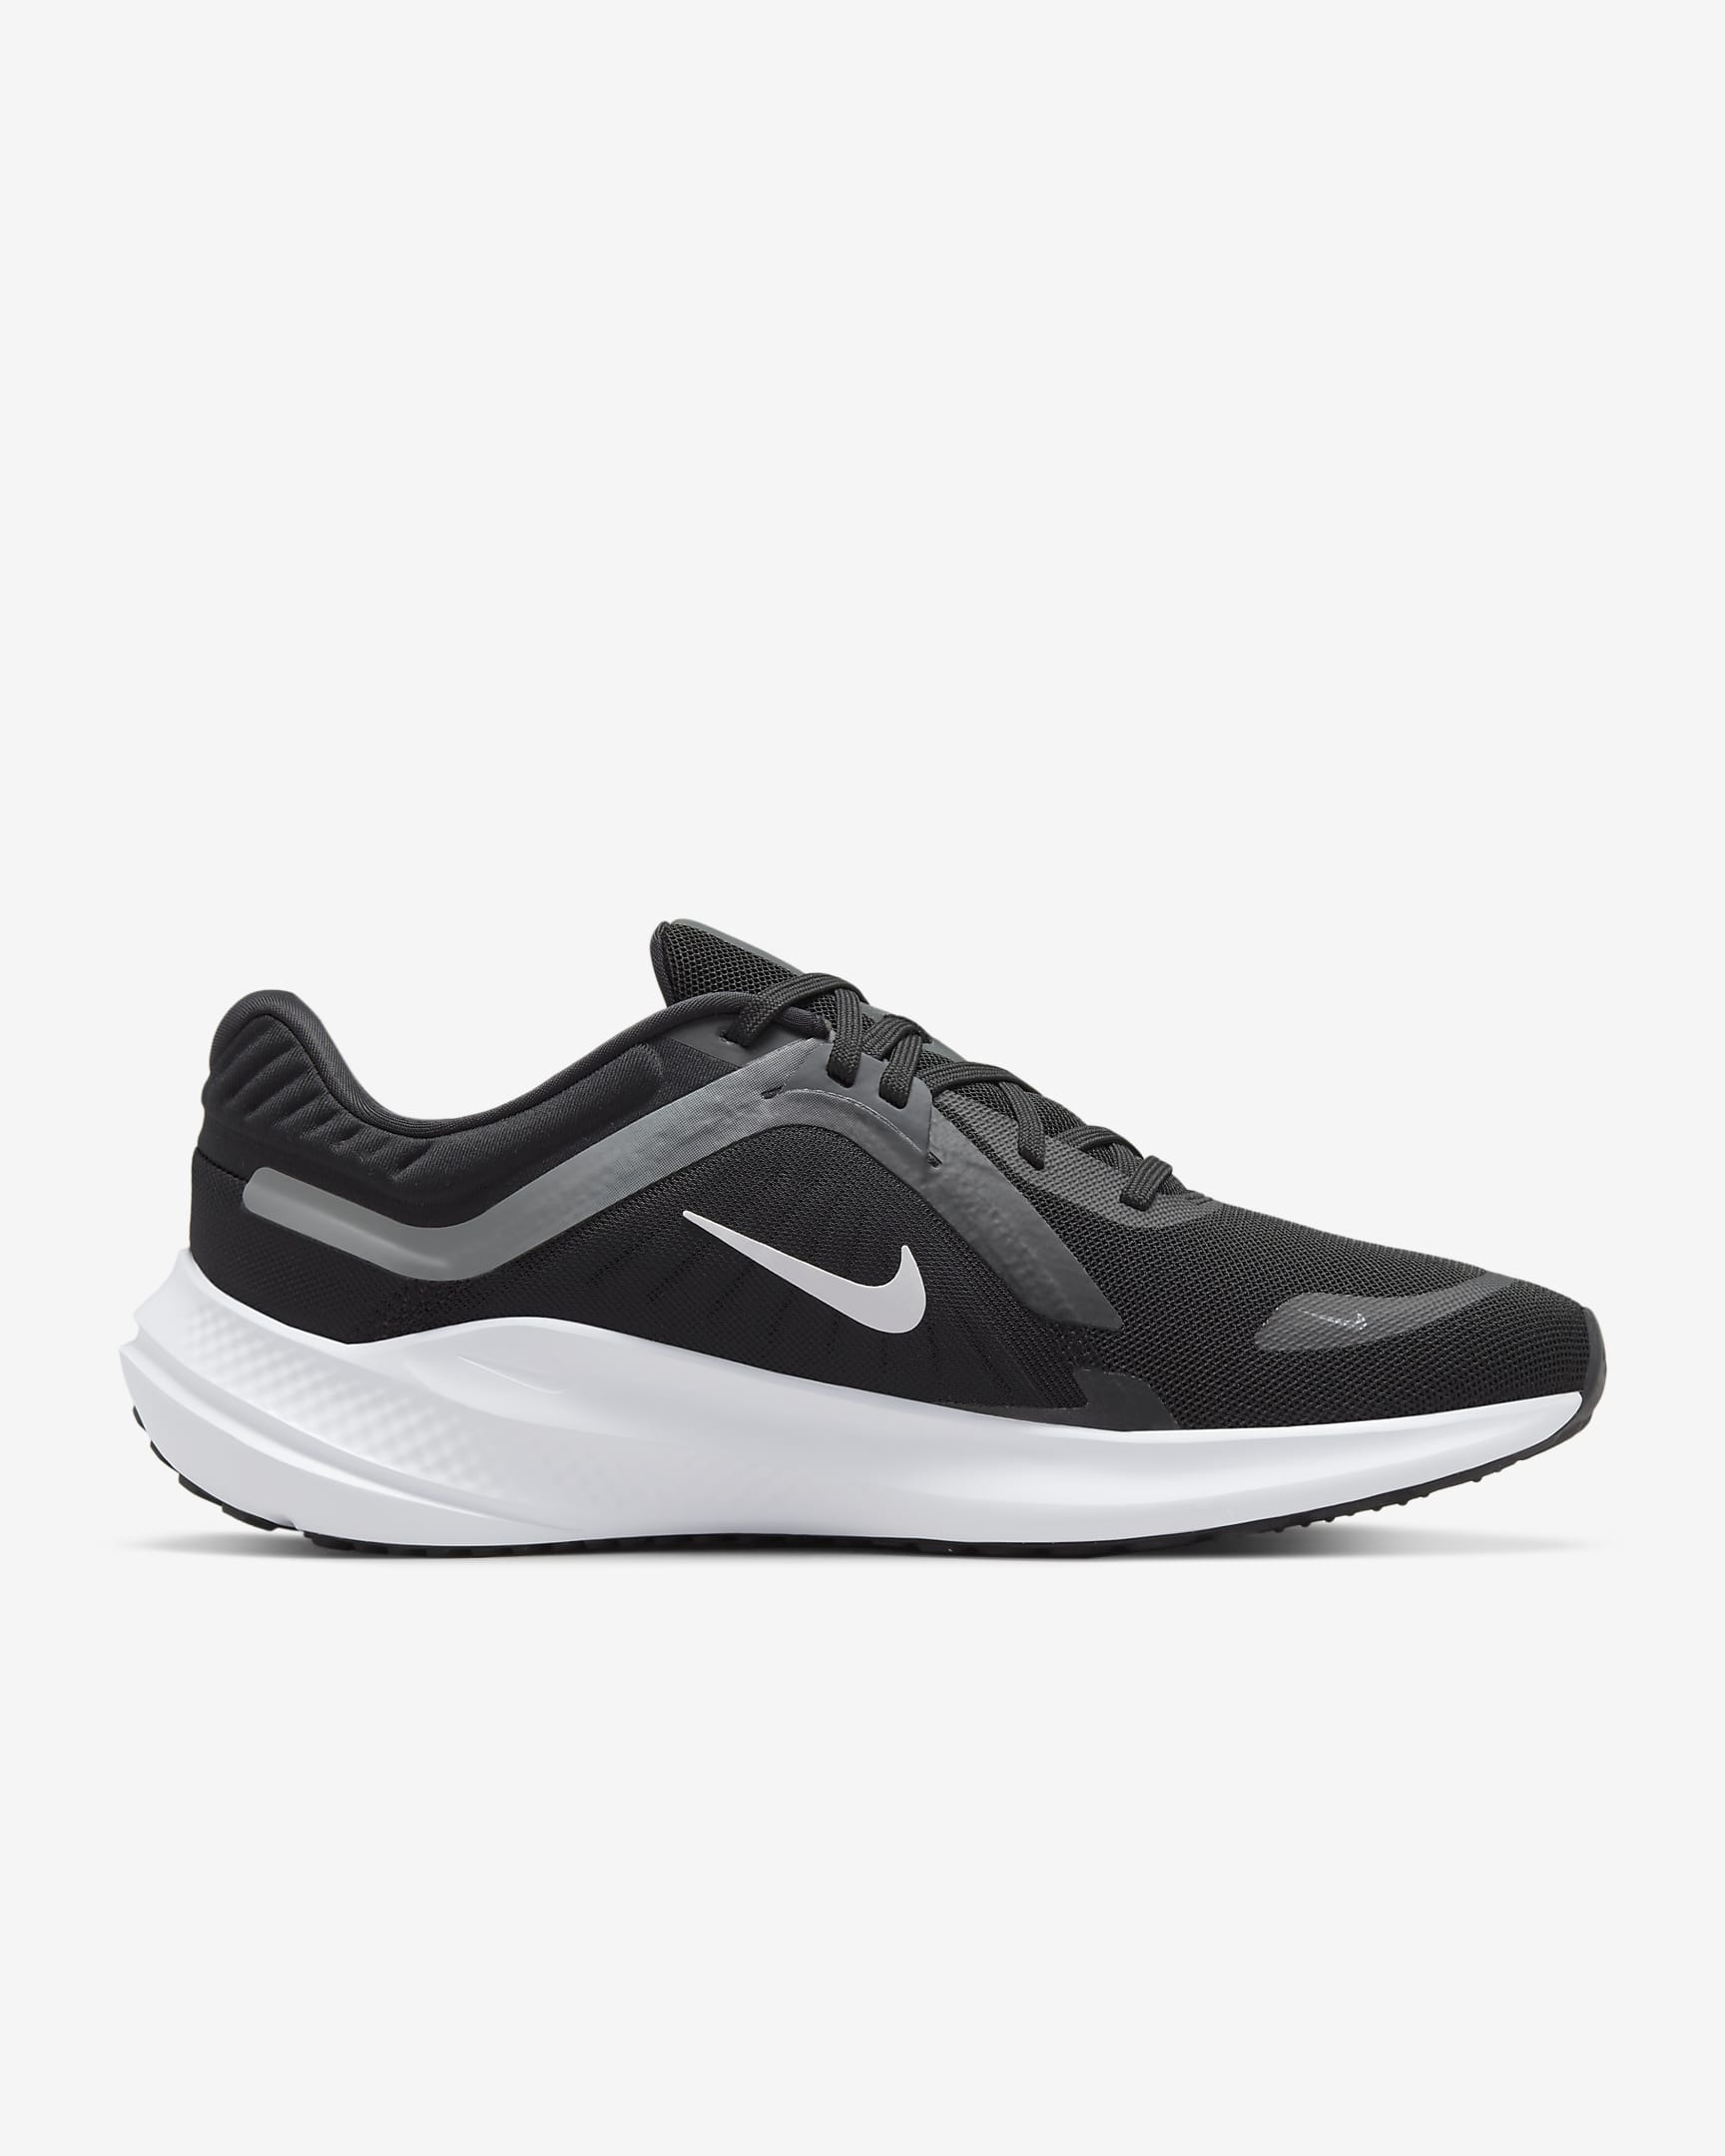 Nike Quest 5 Men's Road Running Shoes. Nike AT